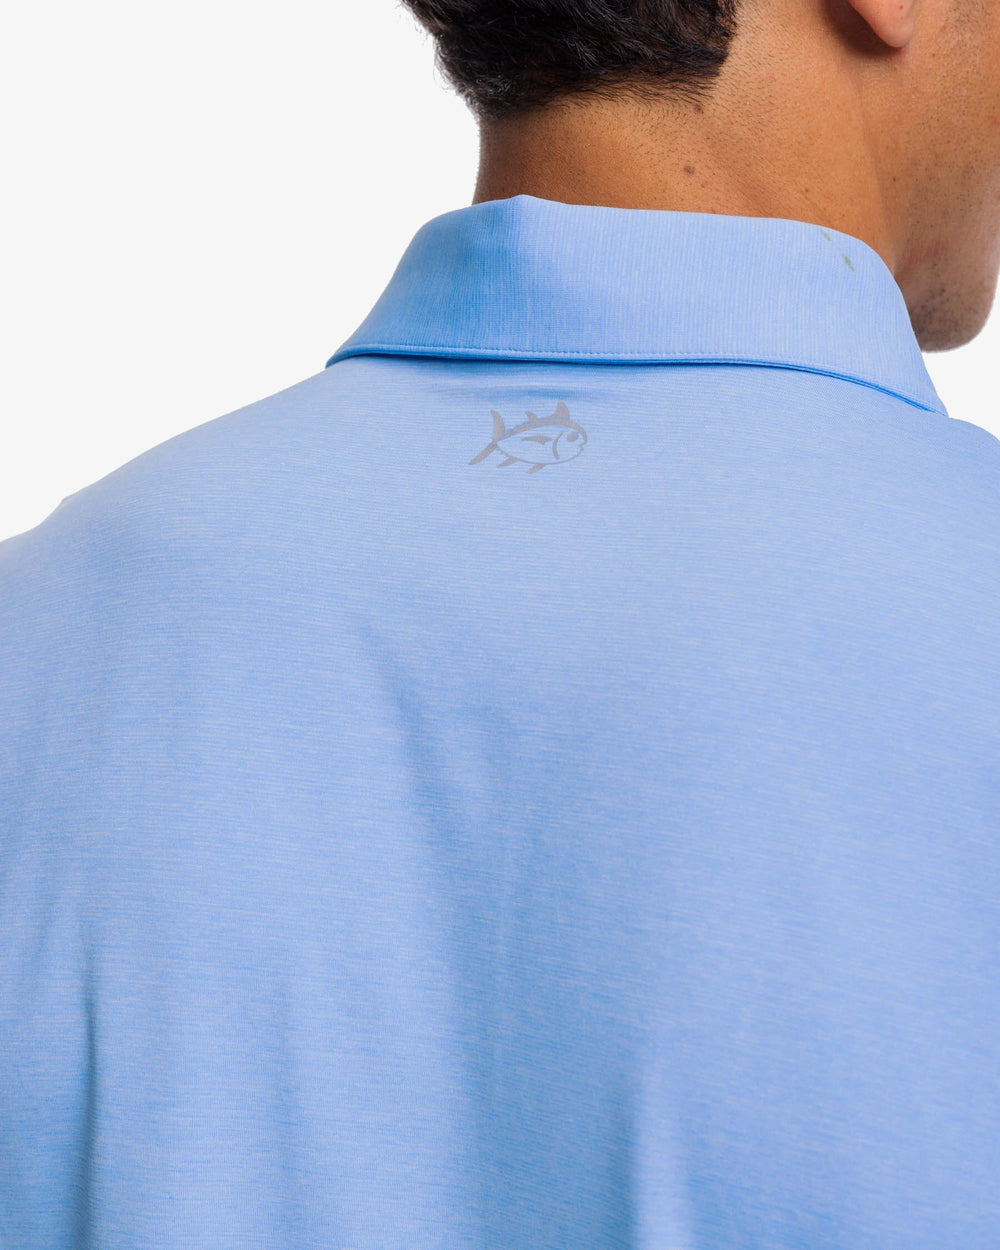 The yoke view of the brrr°®-eeze Heather Performance Polo Shirt by Southern Tide - Heather Ocean Channel